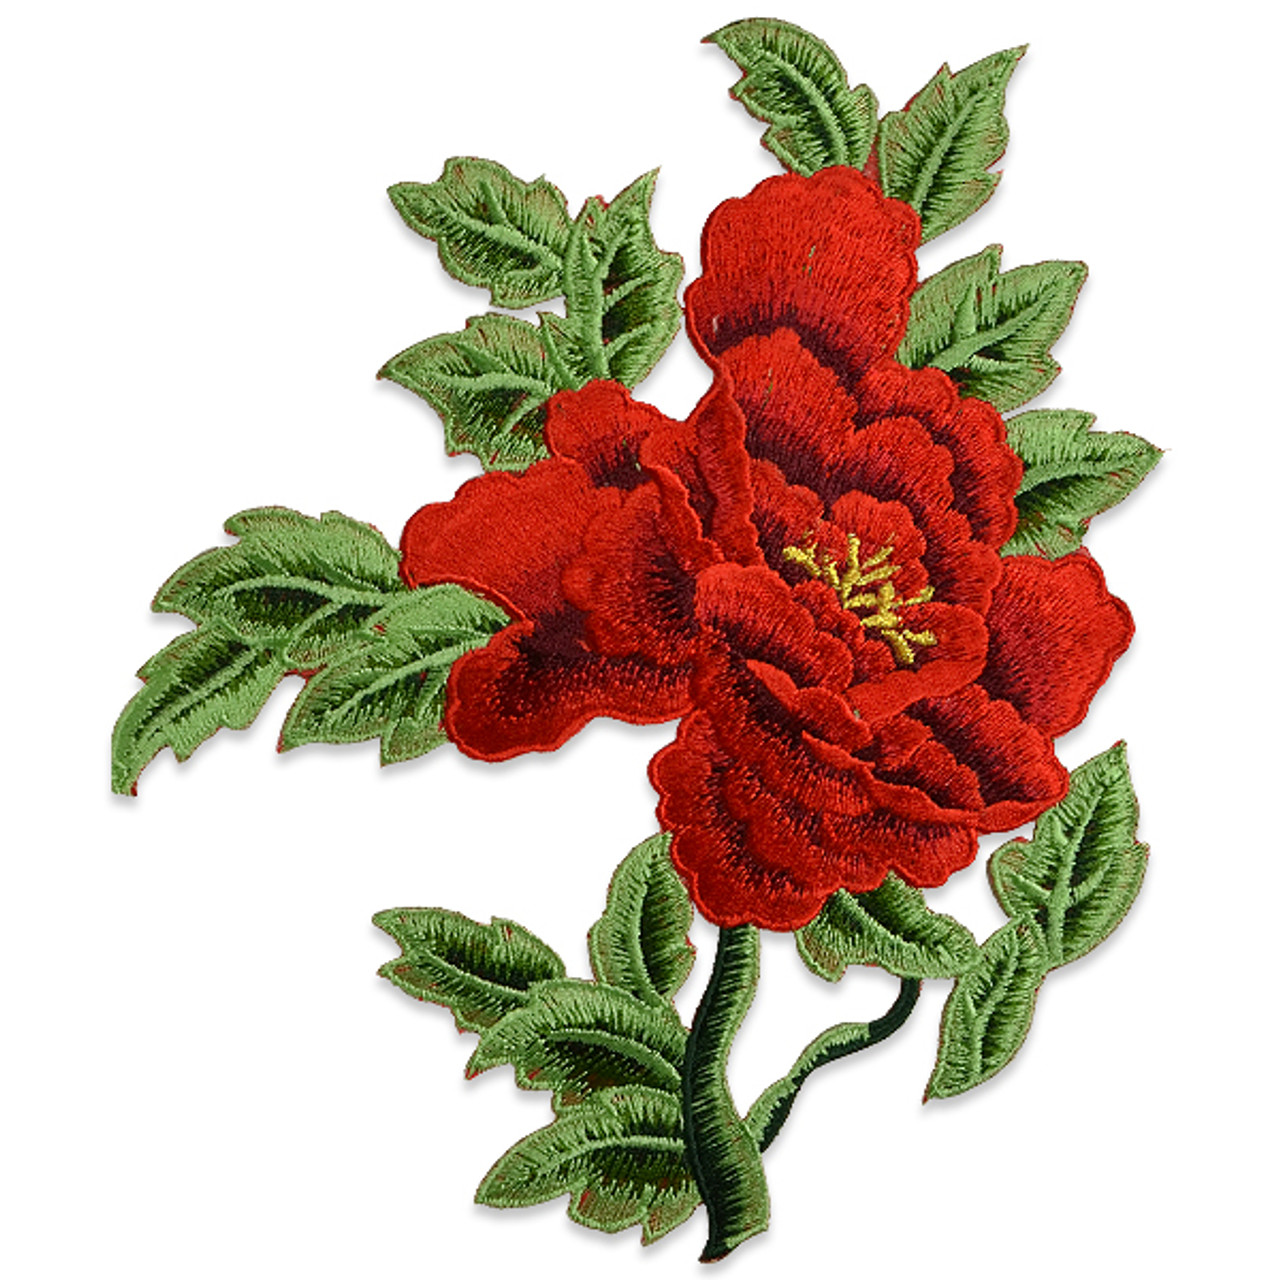 4 Pcs Rose Flower Embroidered Applique Floral Leaves Iron on